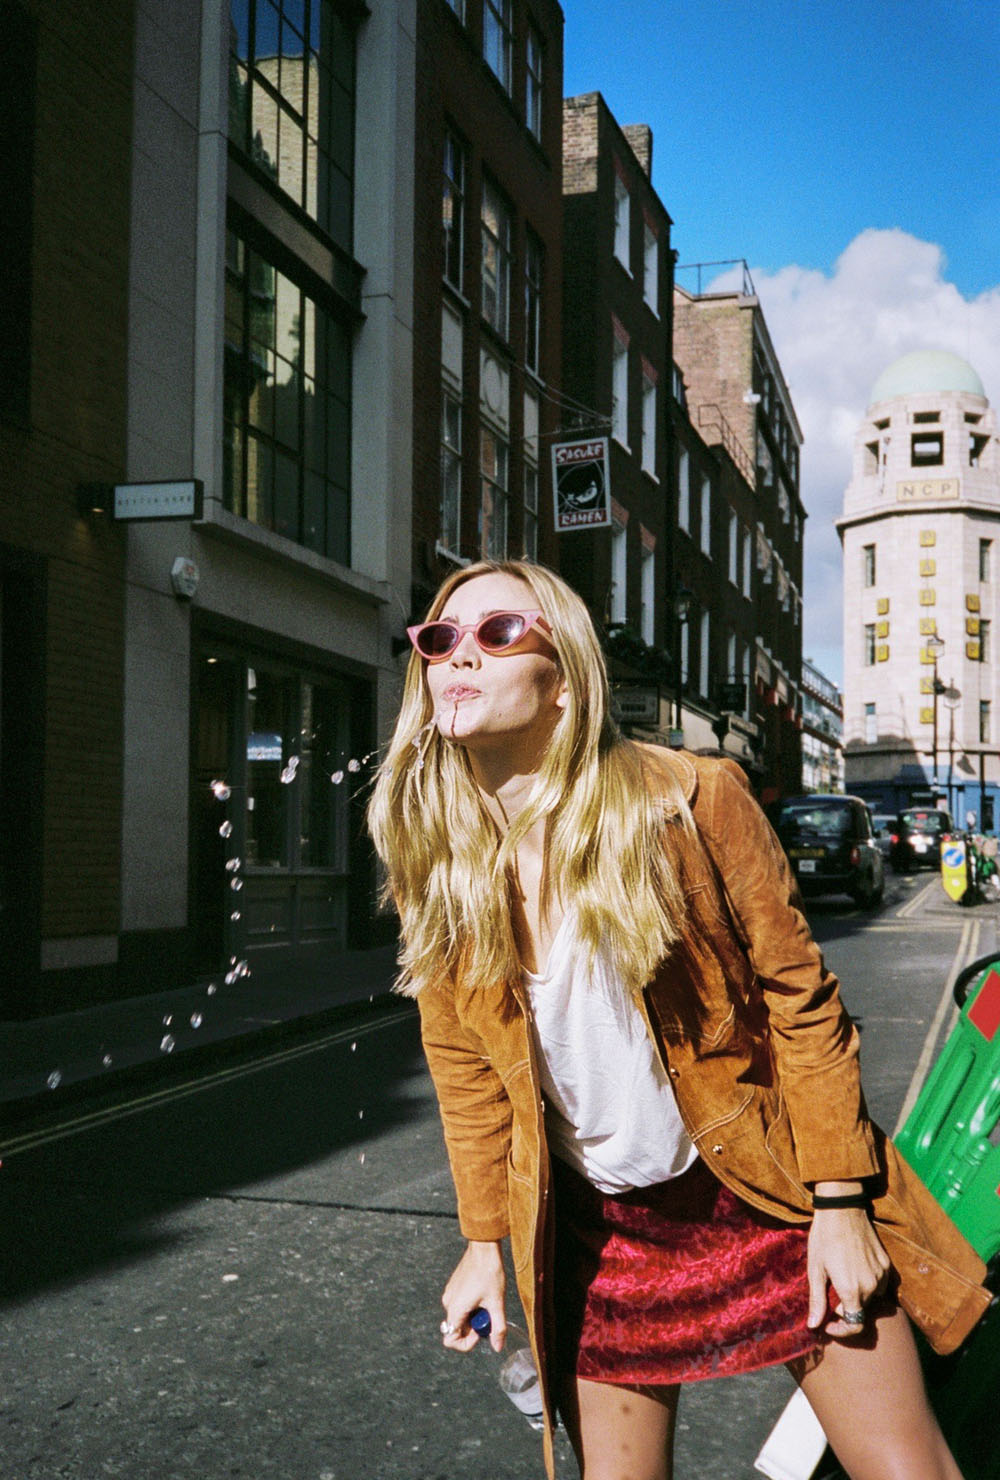 A guerrilla shoot in London with Sophie Young & Rosa Cecilia for ...